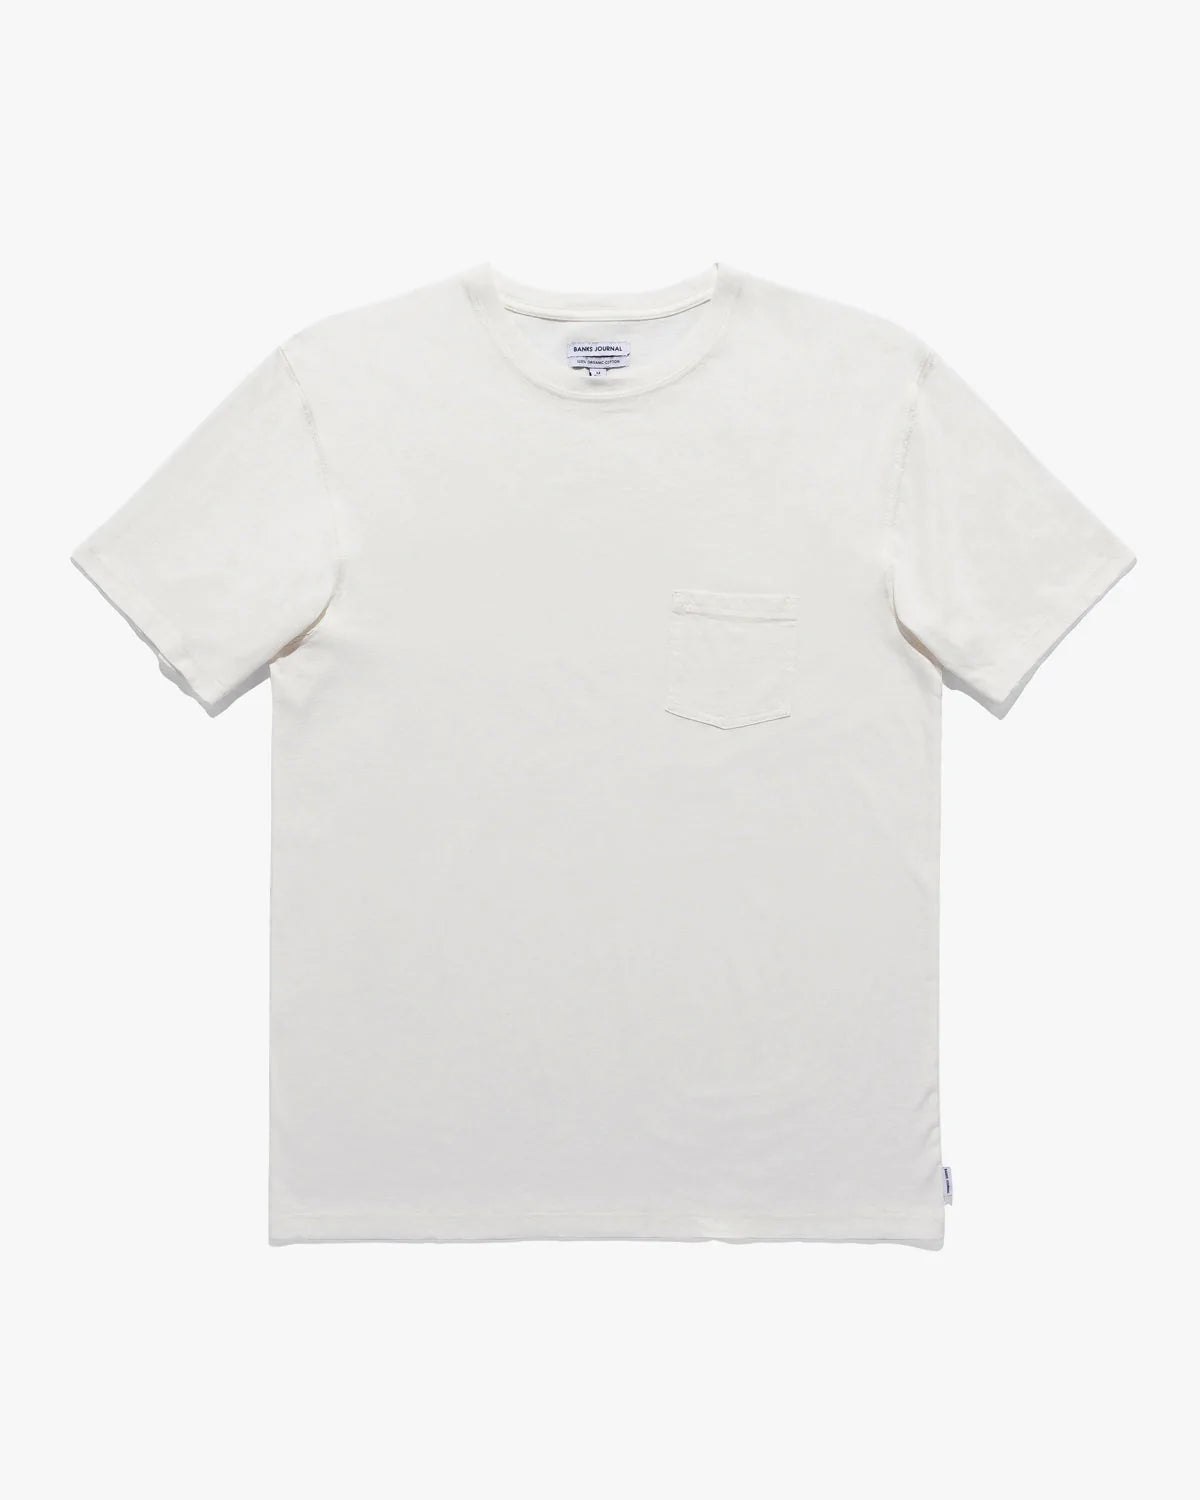 Primary Classic Tee Tee Banks Journal Off White S 